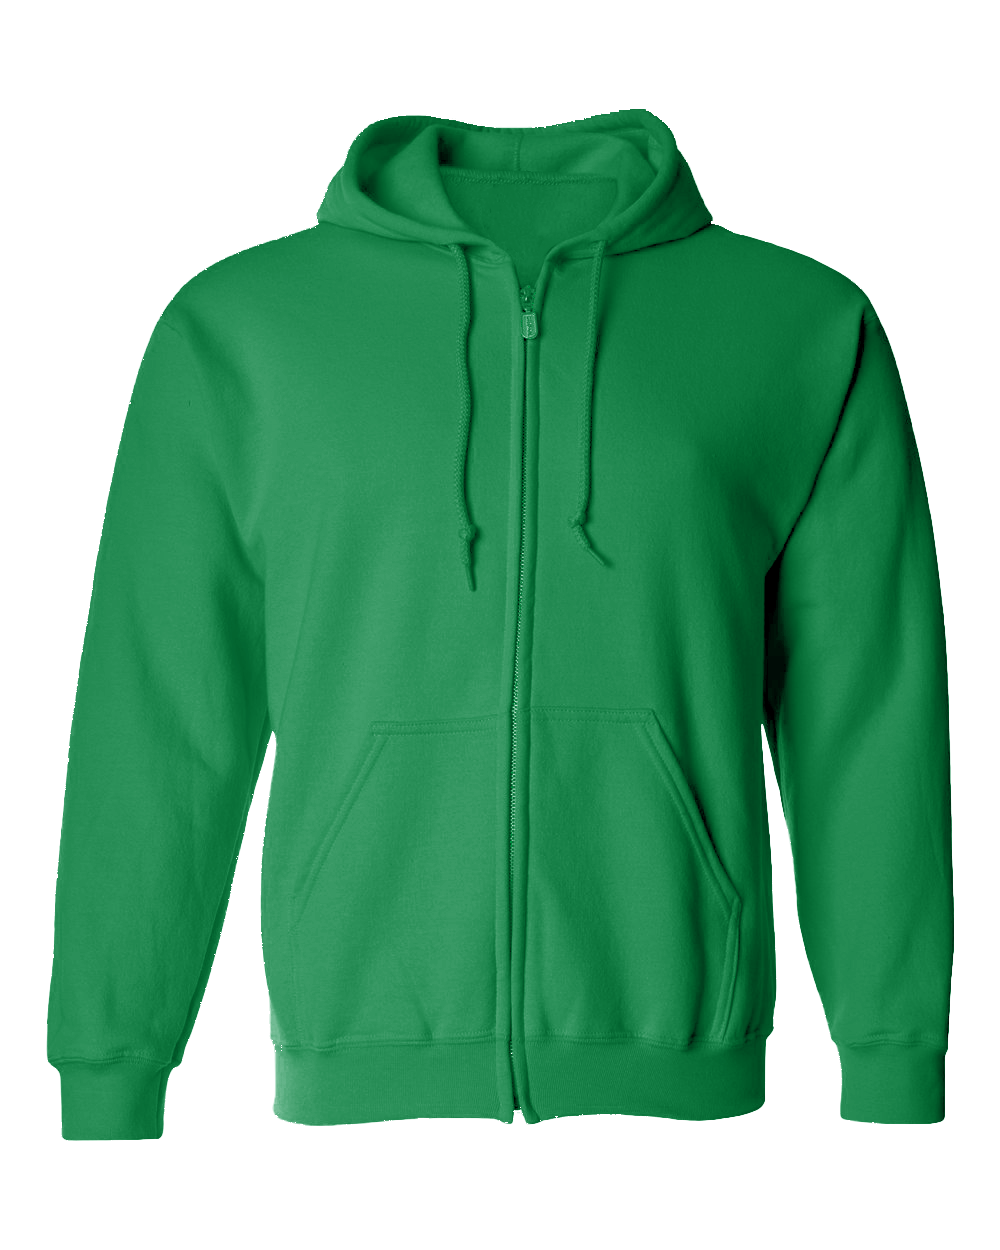 New 3D Tactile! We See With Our Hearts  Full Zip Hoodie - Green